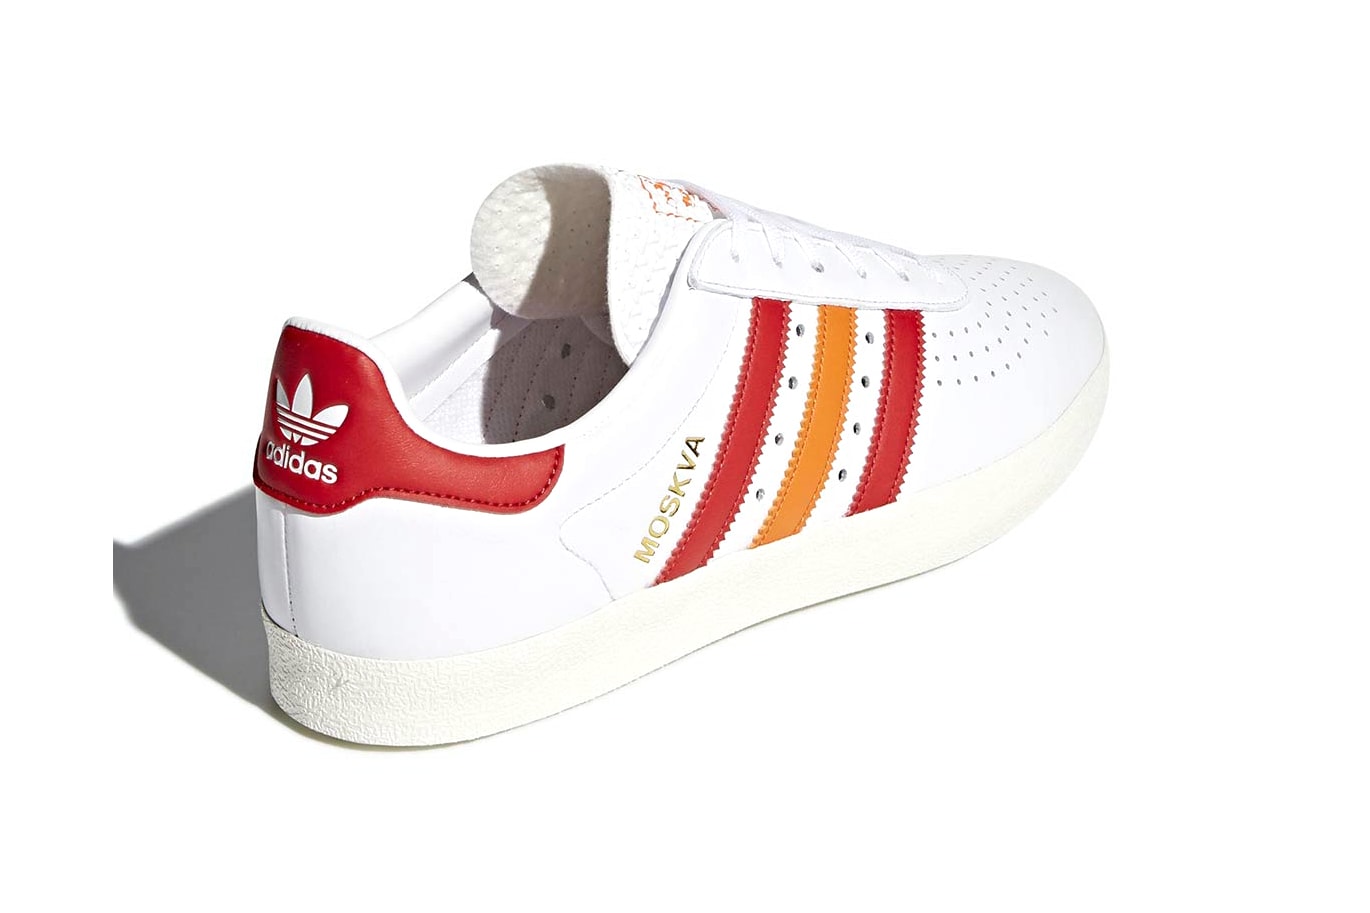 adidas 350 russia moscow release info black white sneakers footwear